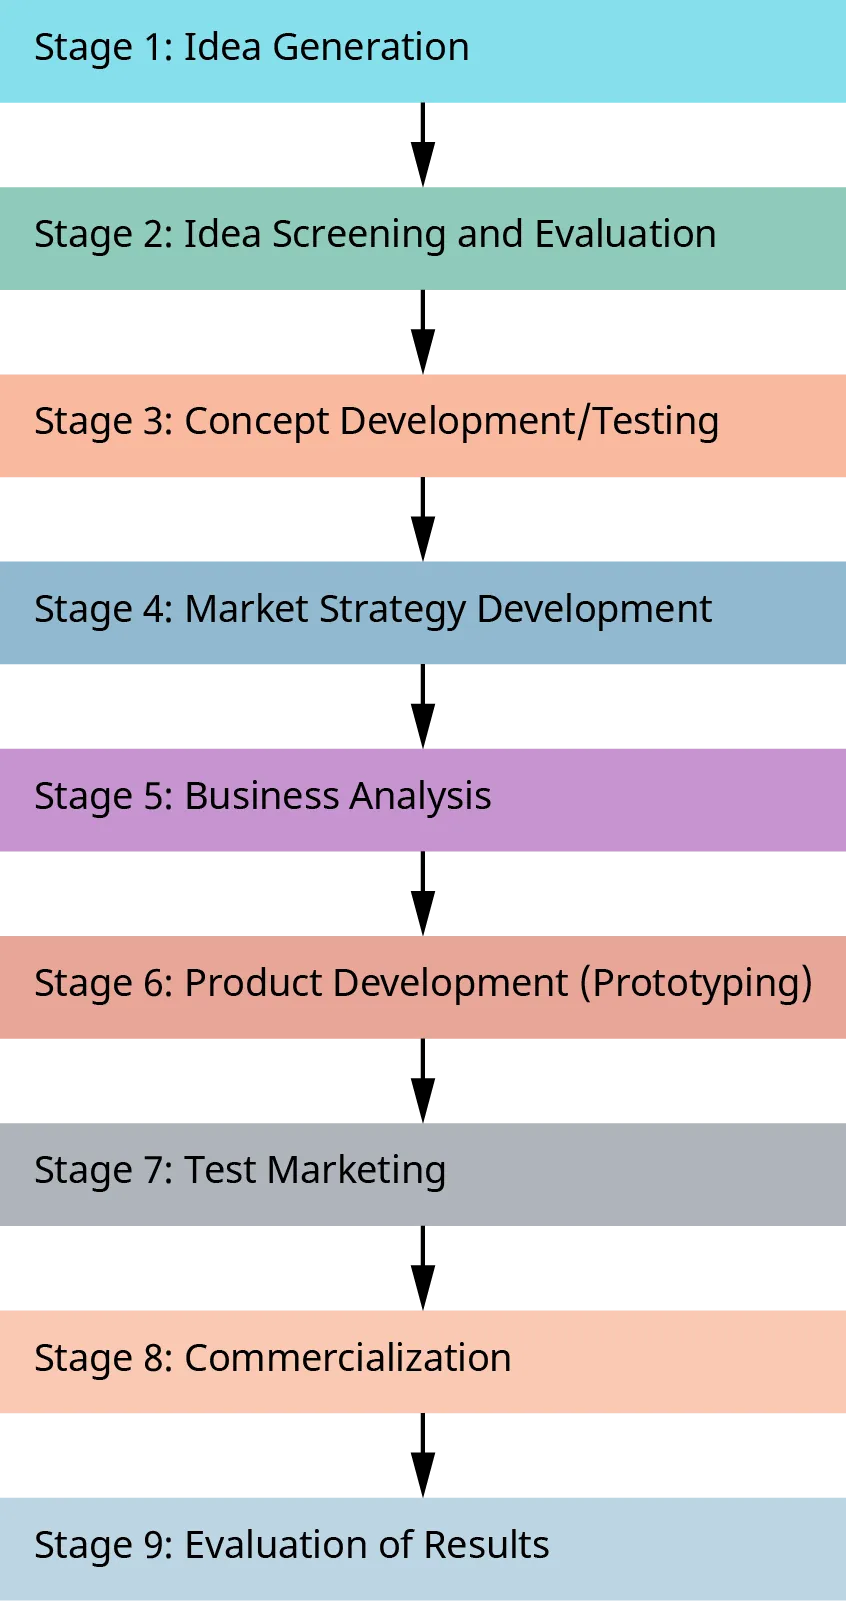 The stages of the new product development process are: Stage 1 Idea Generation, Stage 2 Idea Screening and Evaluation, Stage 3 Concept Development and Testing, Stage 4 Market Strategy Development, Stage 5 Business Analysis, Stage 6 Product Development or Prototyping, Stage 7 Test Marketing, Stage 8 Commercialization, and Stage 9 Evaluation of Results.